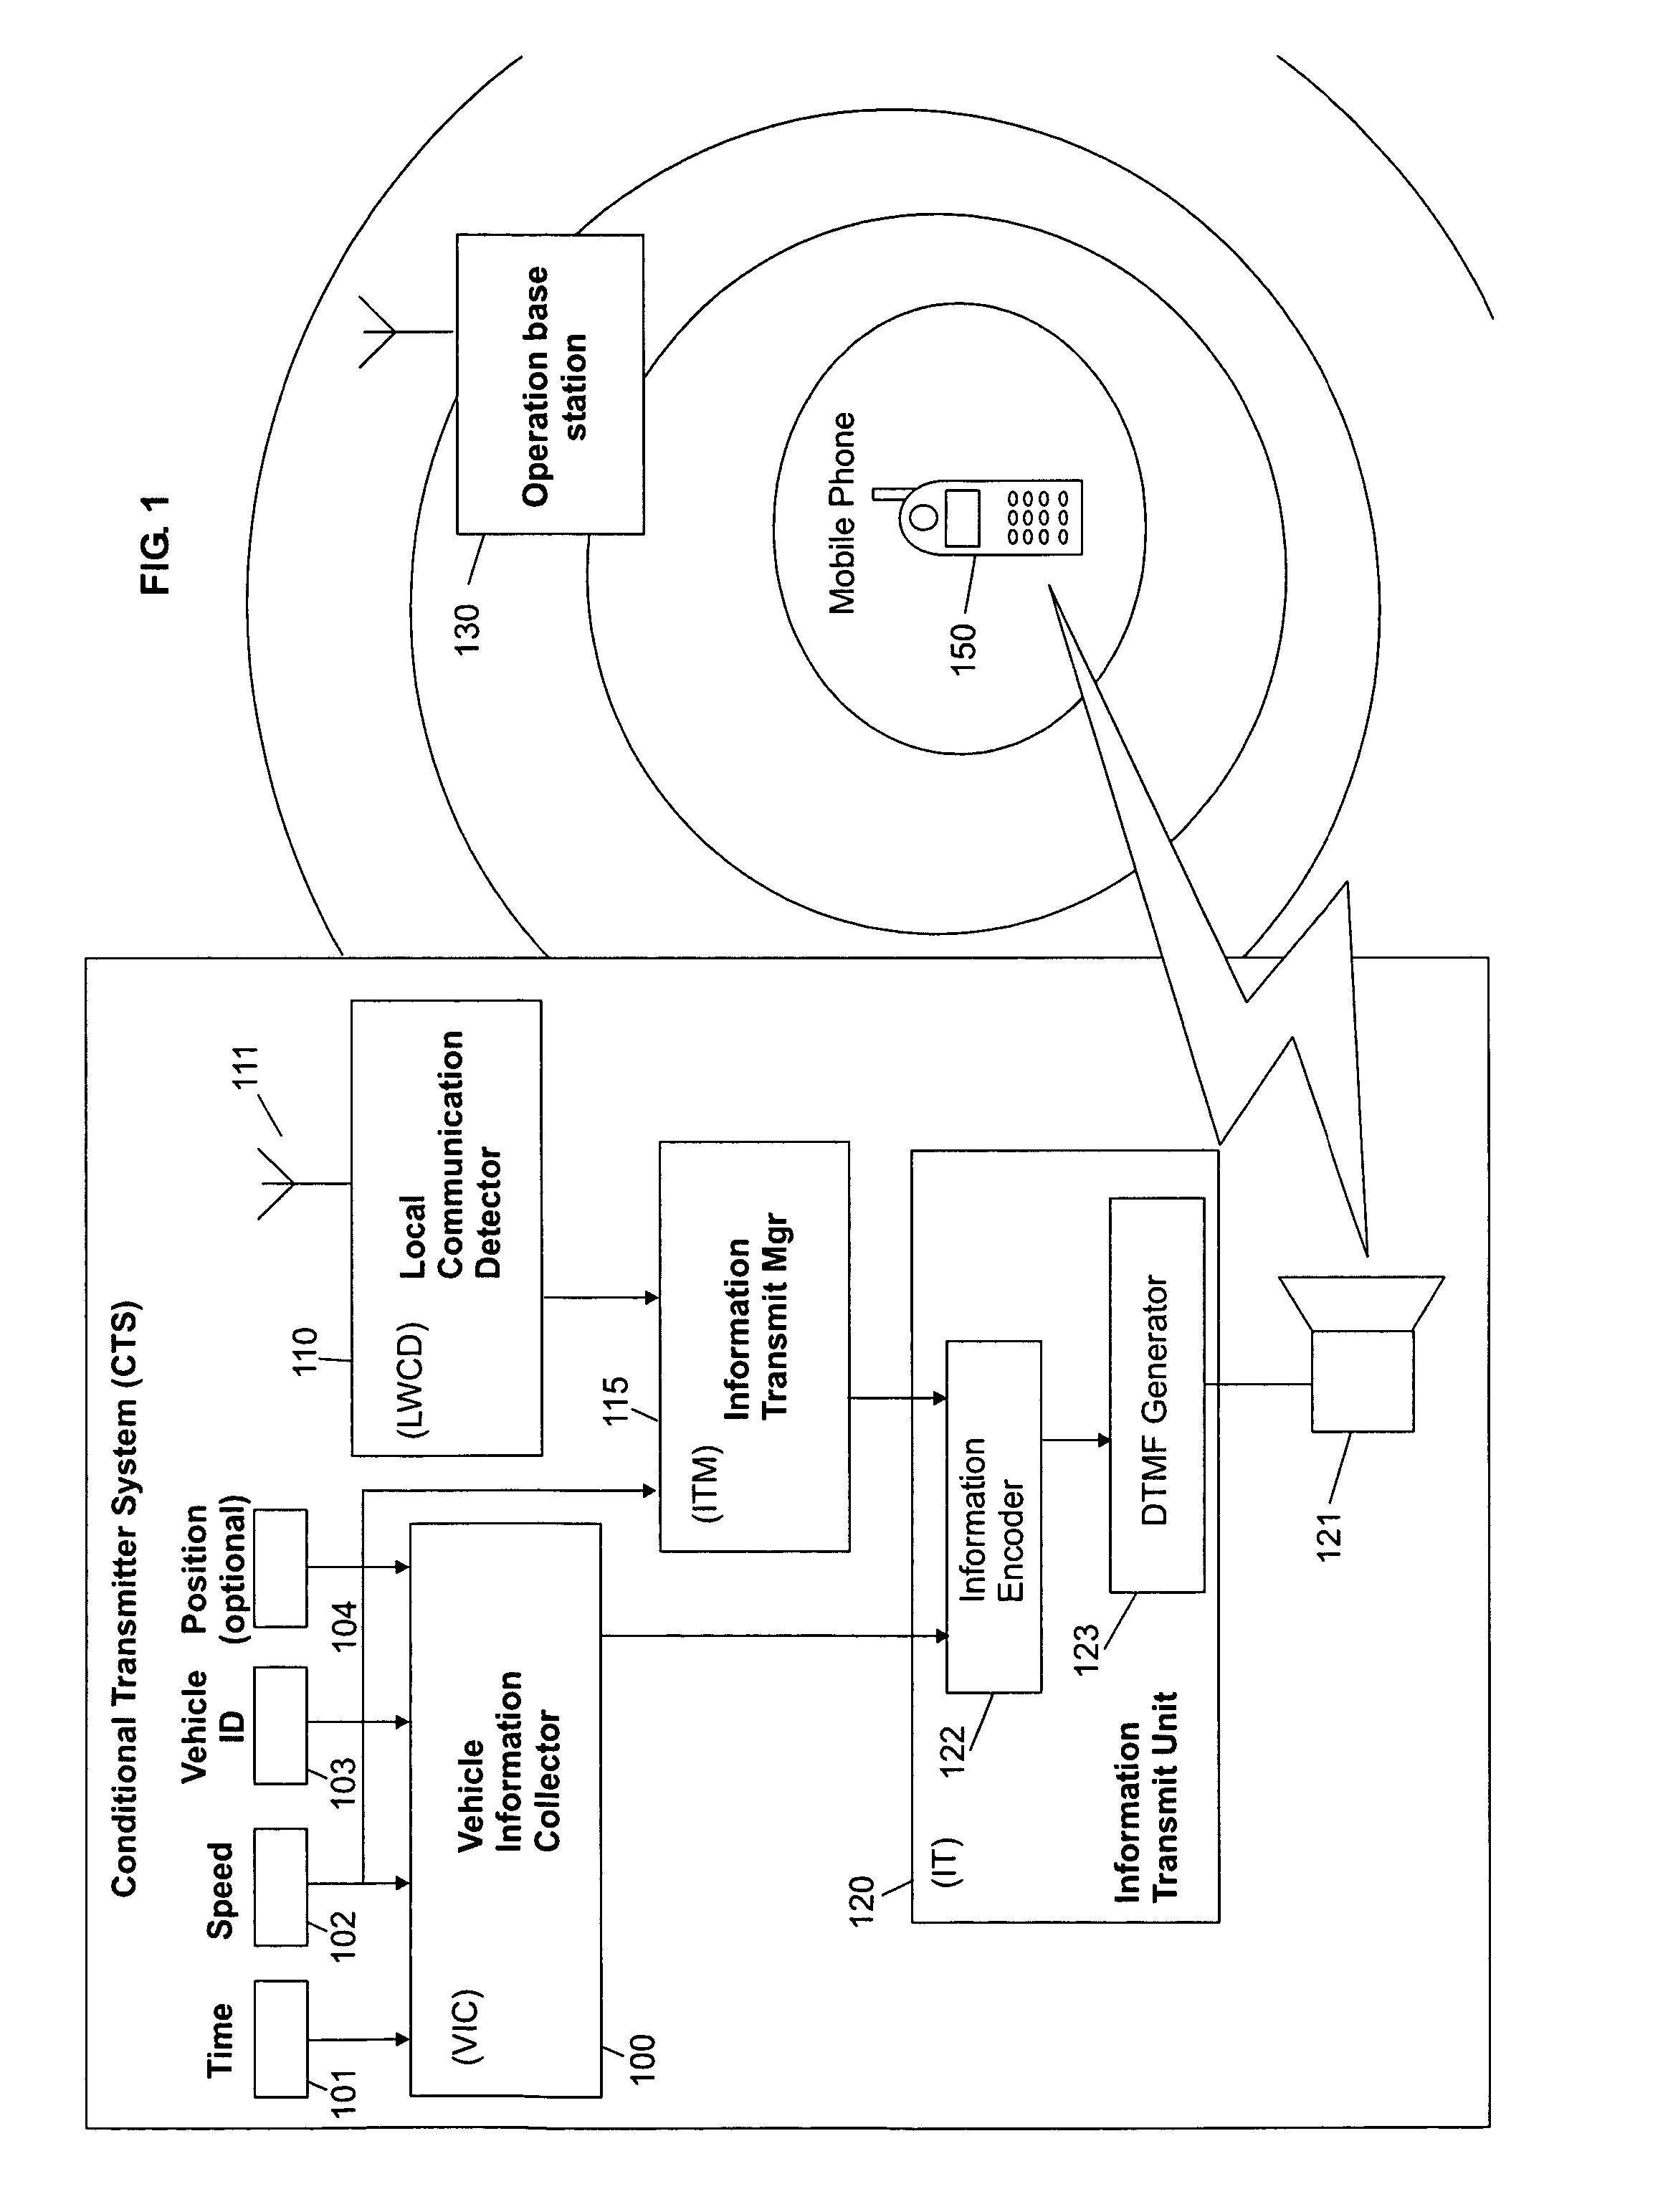 System for transmitting to a wireless service provider physical information related to a moving vehicle during a wireless communication